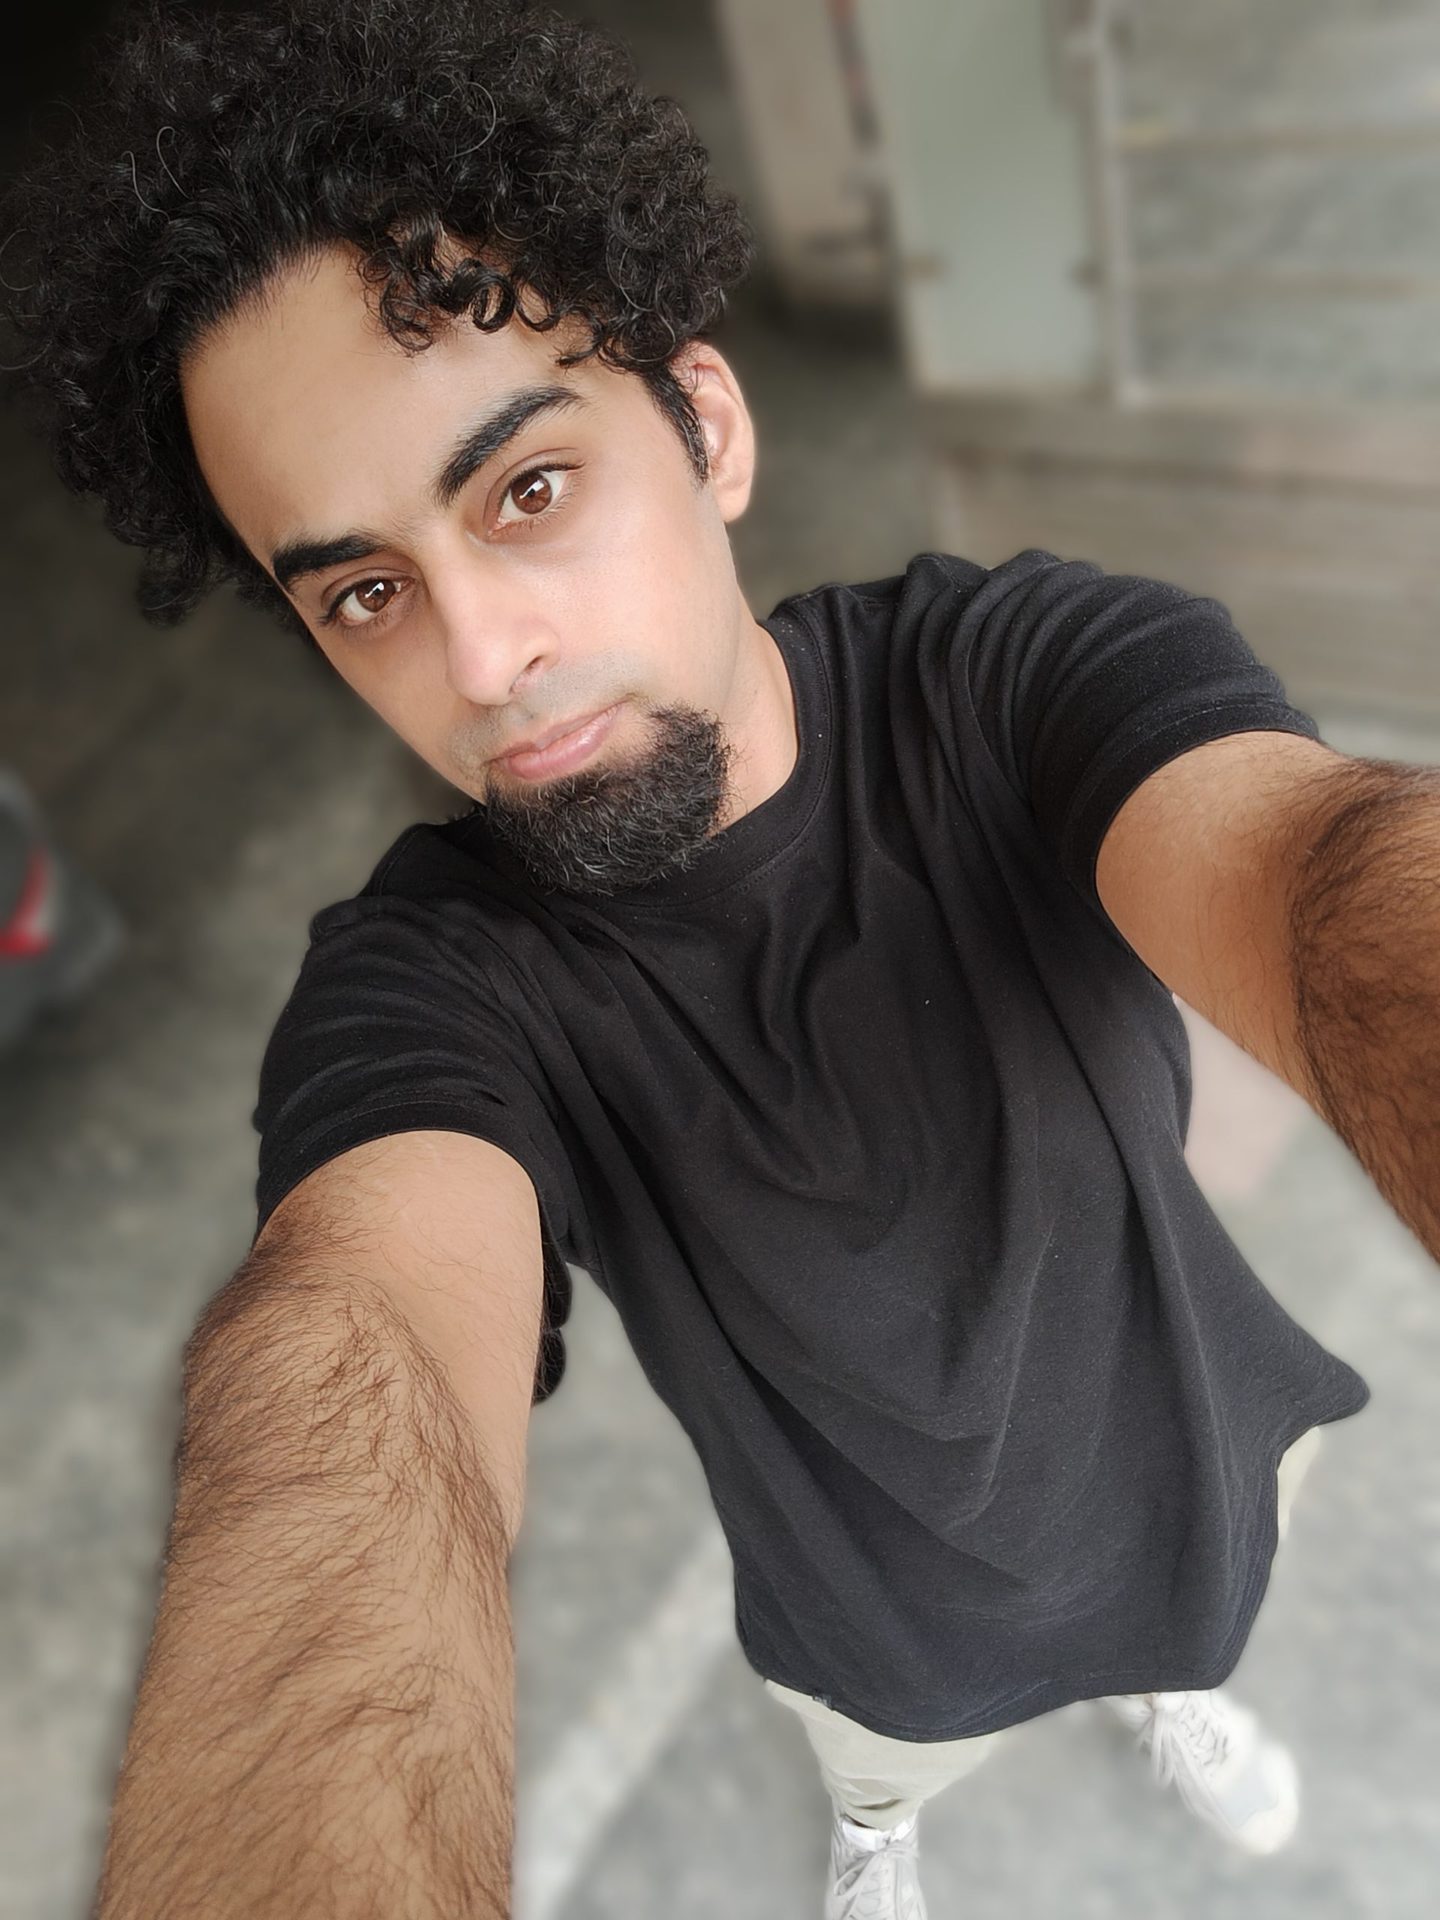 Realme GT selfie portrait mode shot of a man with dark curly hair and a beard, wearing a black t-shirt.